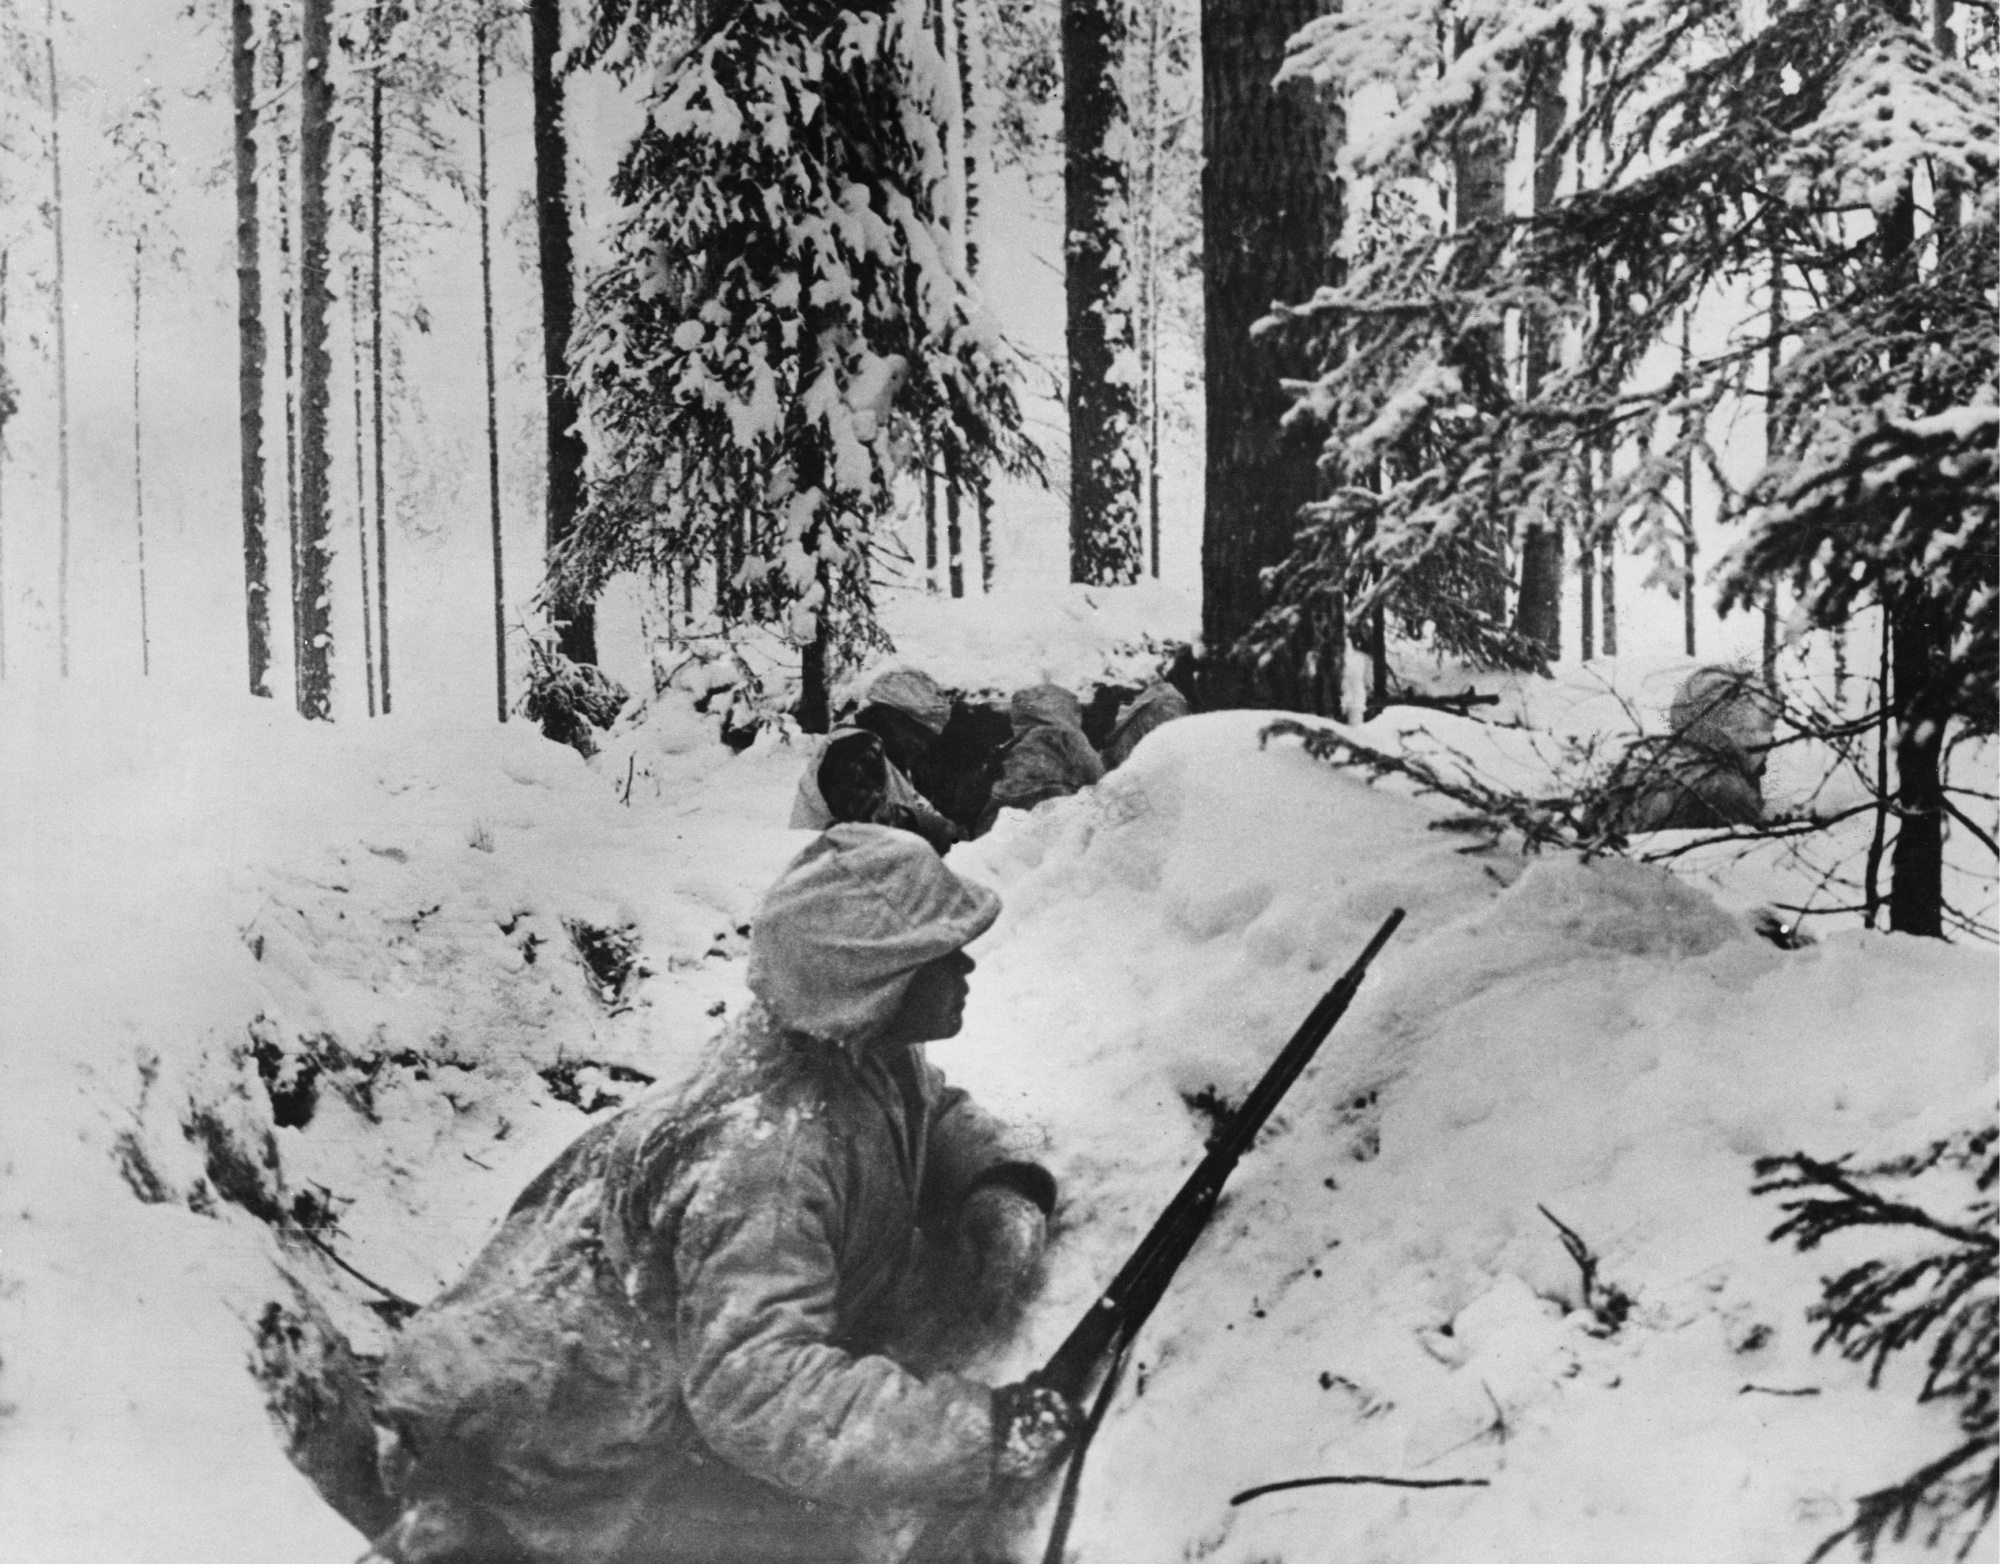 My Grandmother Was in the Winter War. It Was as Ugly as This One - Bloomberg